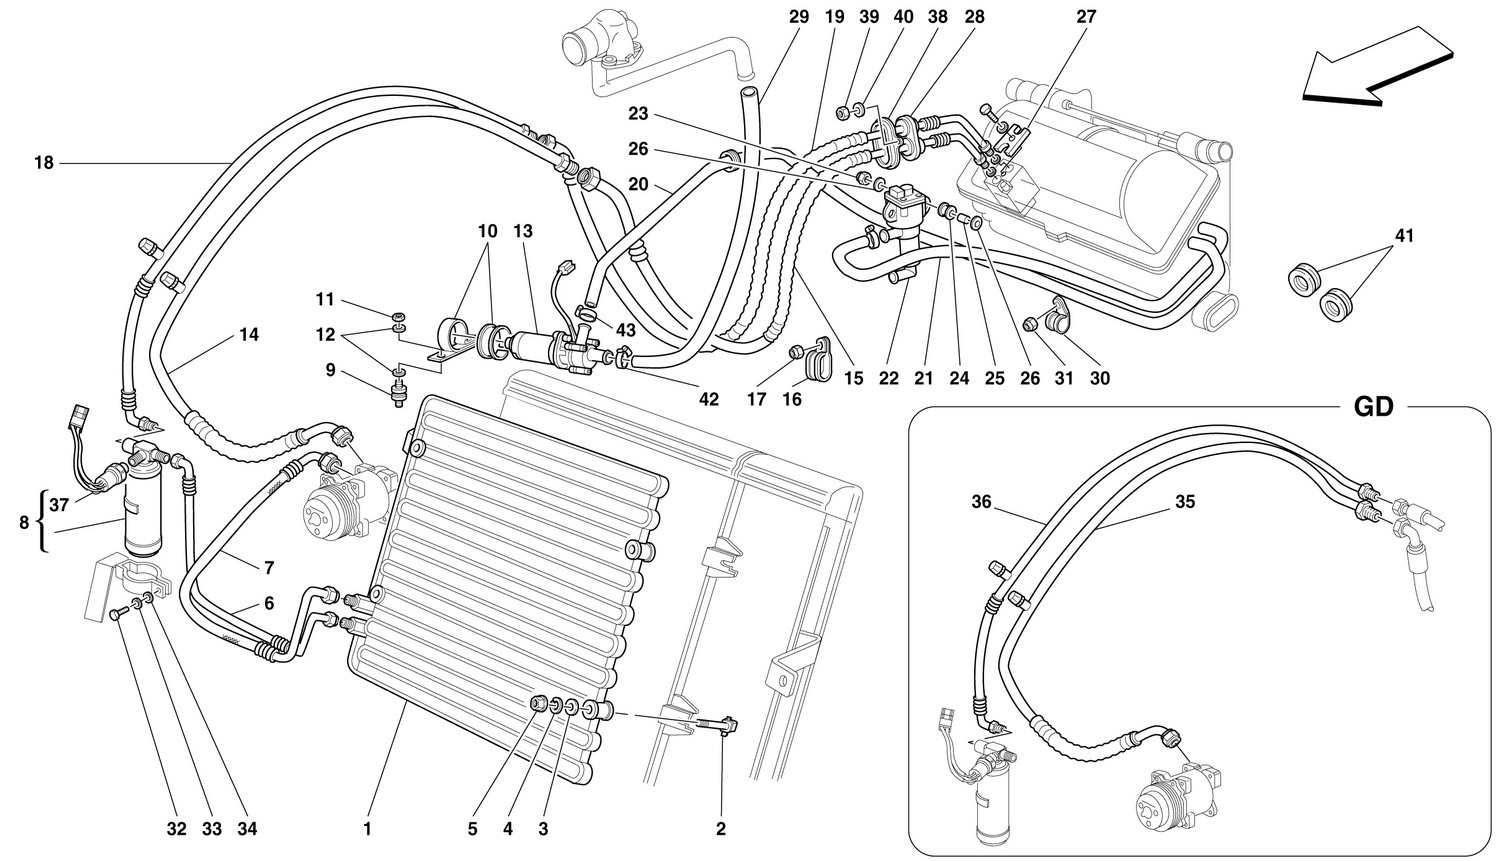 Schematic: Air Conditioning System -Valid Till Ass. Nr. 20878-